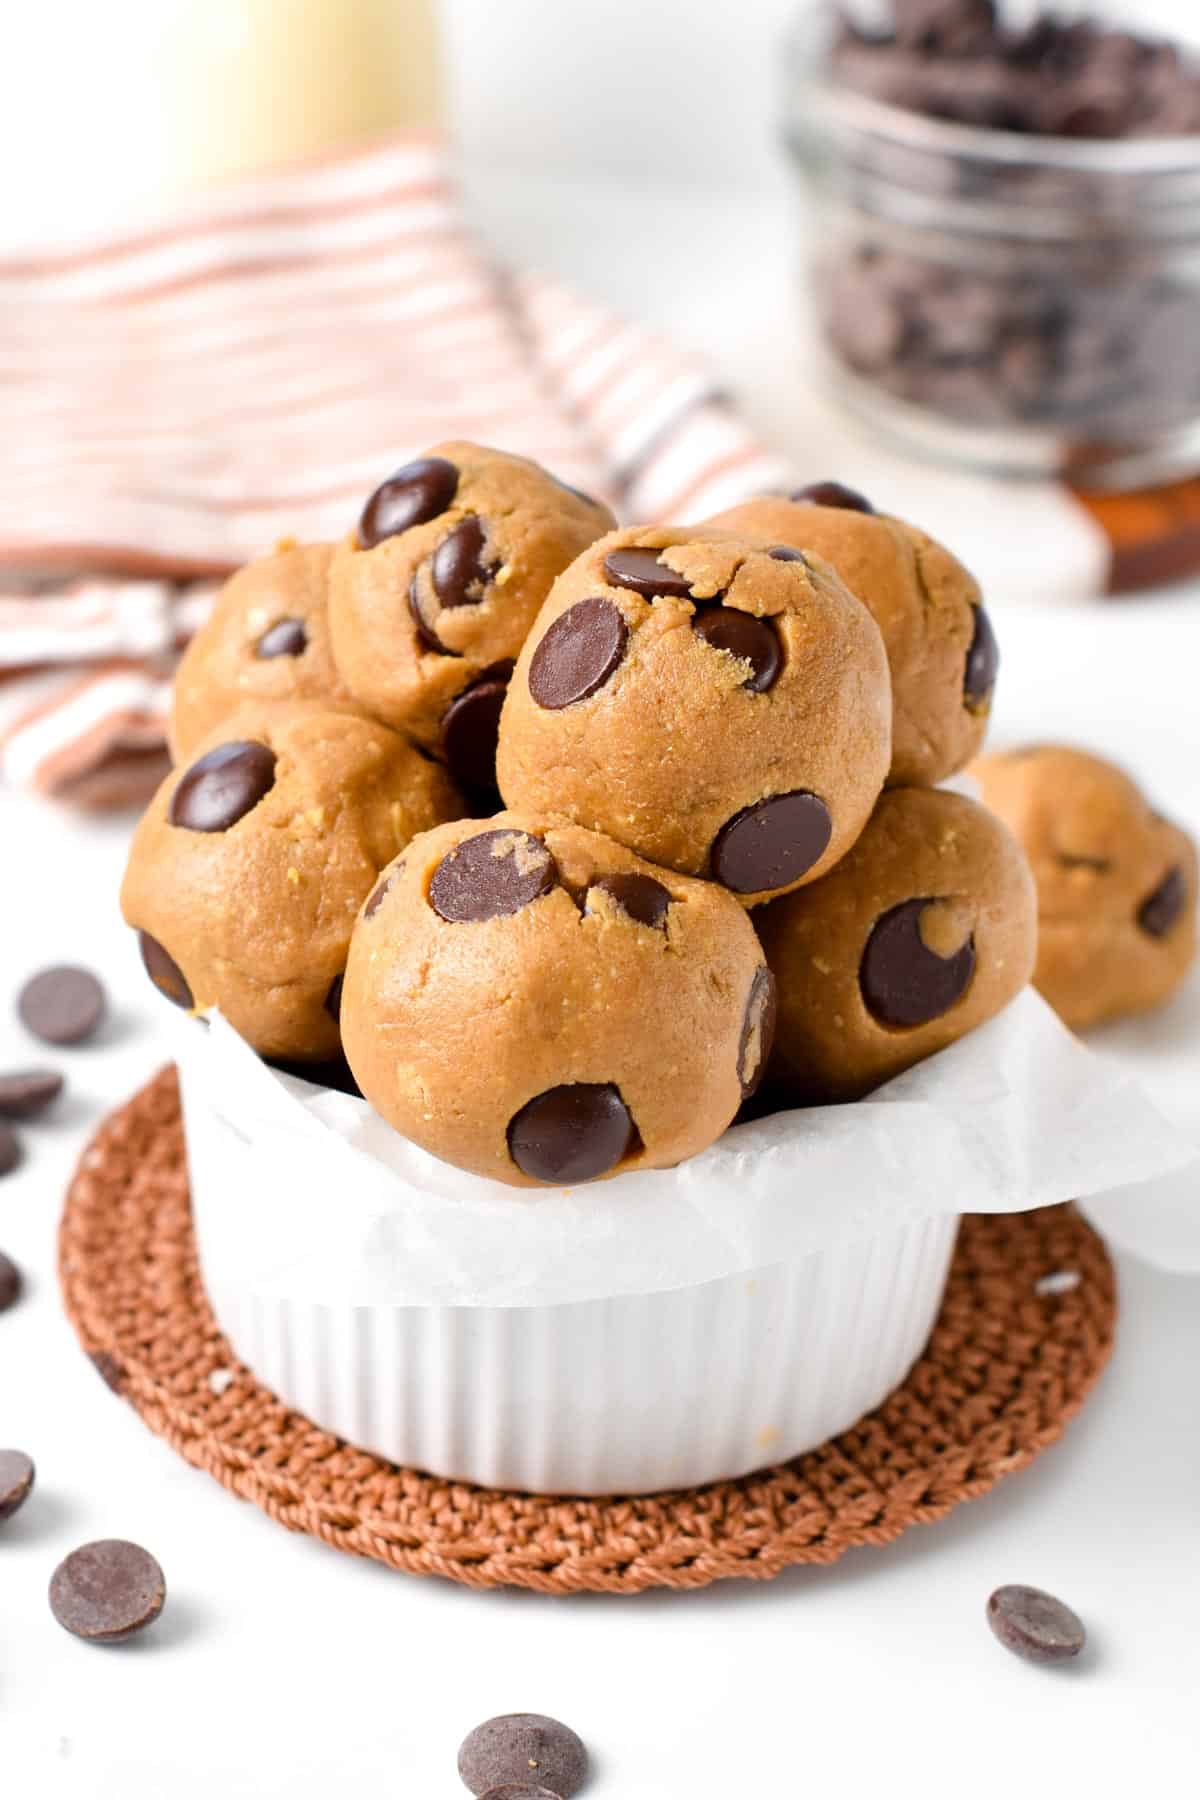 These Cookie Dough Protein Balls are easy no-bake healthy snacks packed with plant-based proteins from nut butter and protein powder. Plus, these are vegan, gluten-free, and dairy-free. 